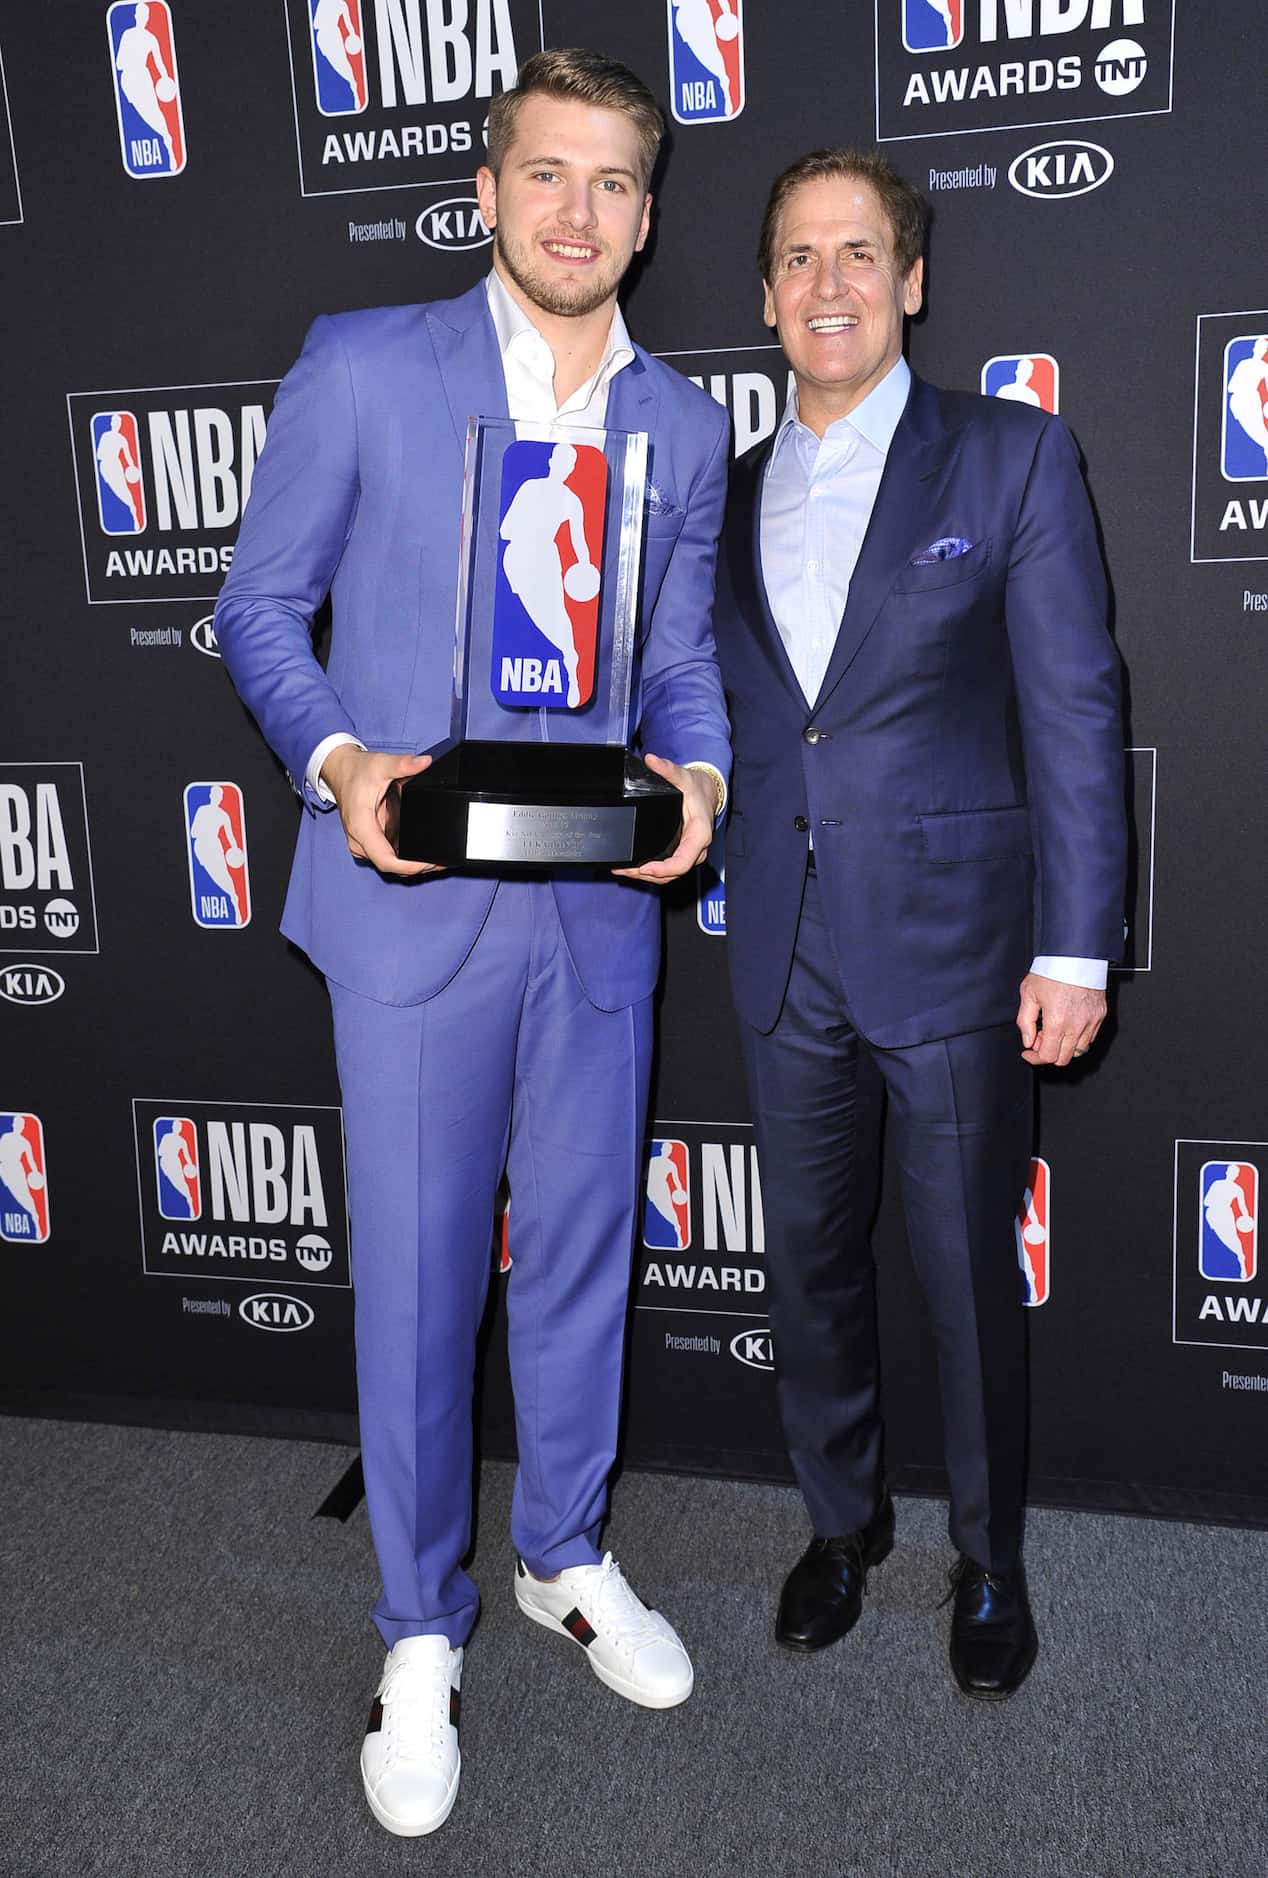 June 24, 2019: Luka Doncic, recipient of the NBA rookie of the year award, poses in the...